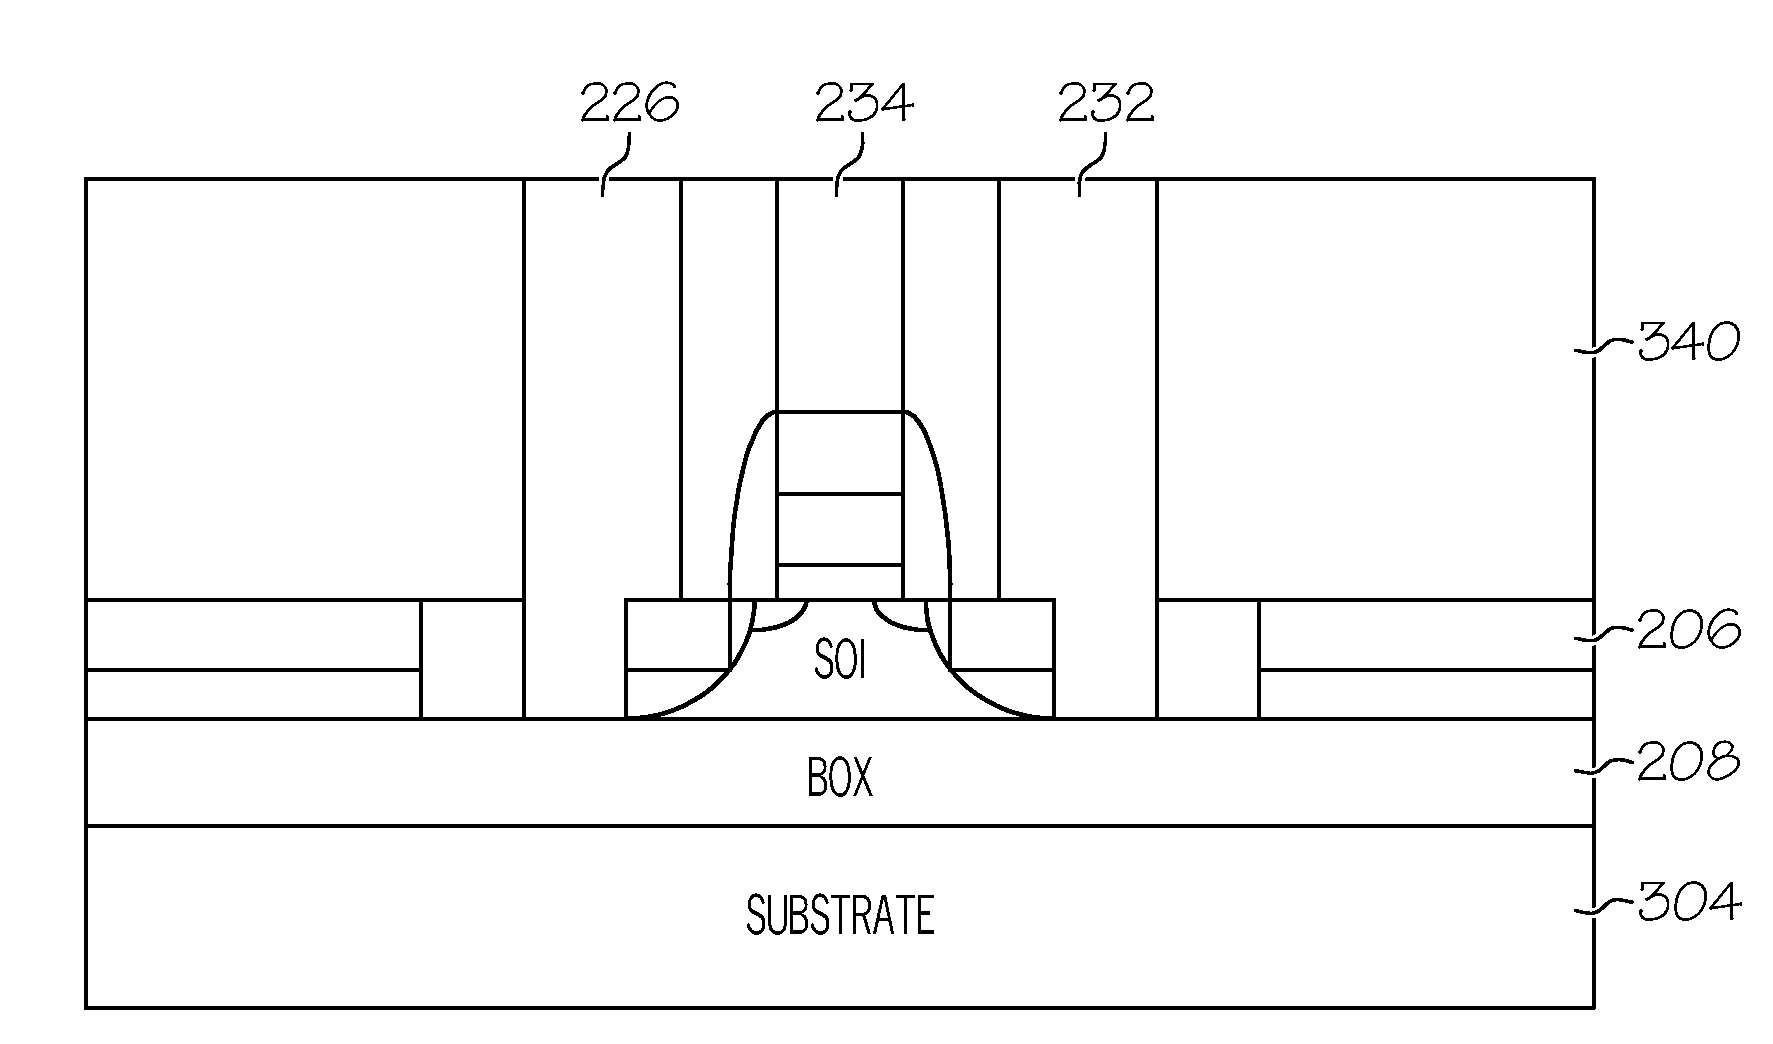 Semiconductor device having decreased contact resistance